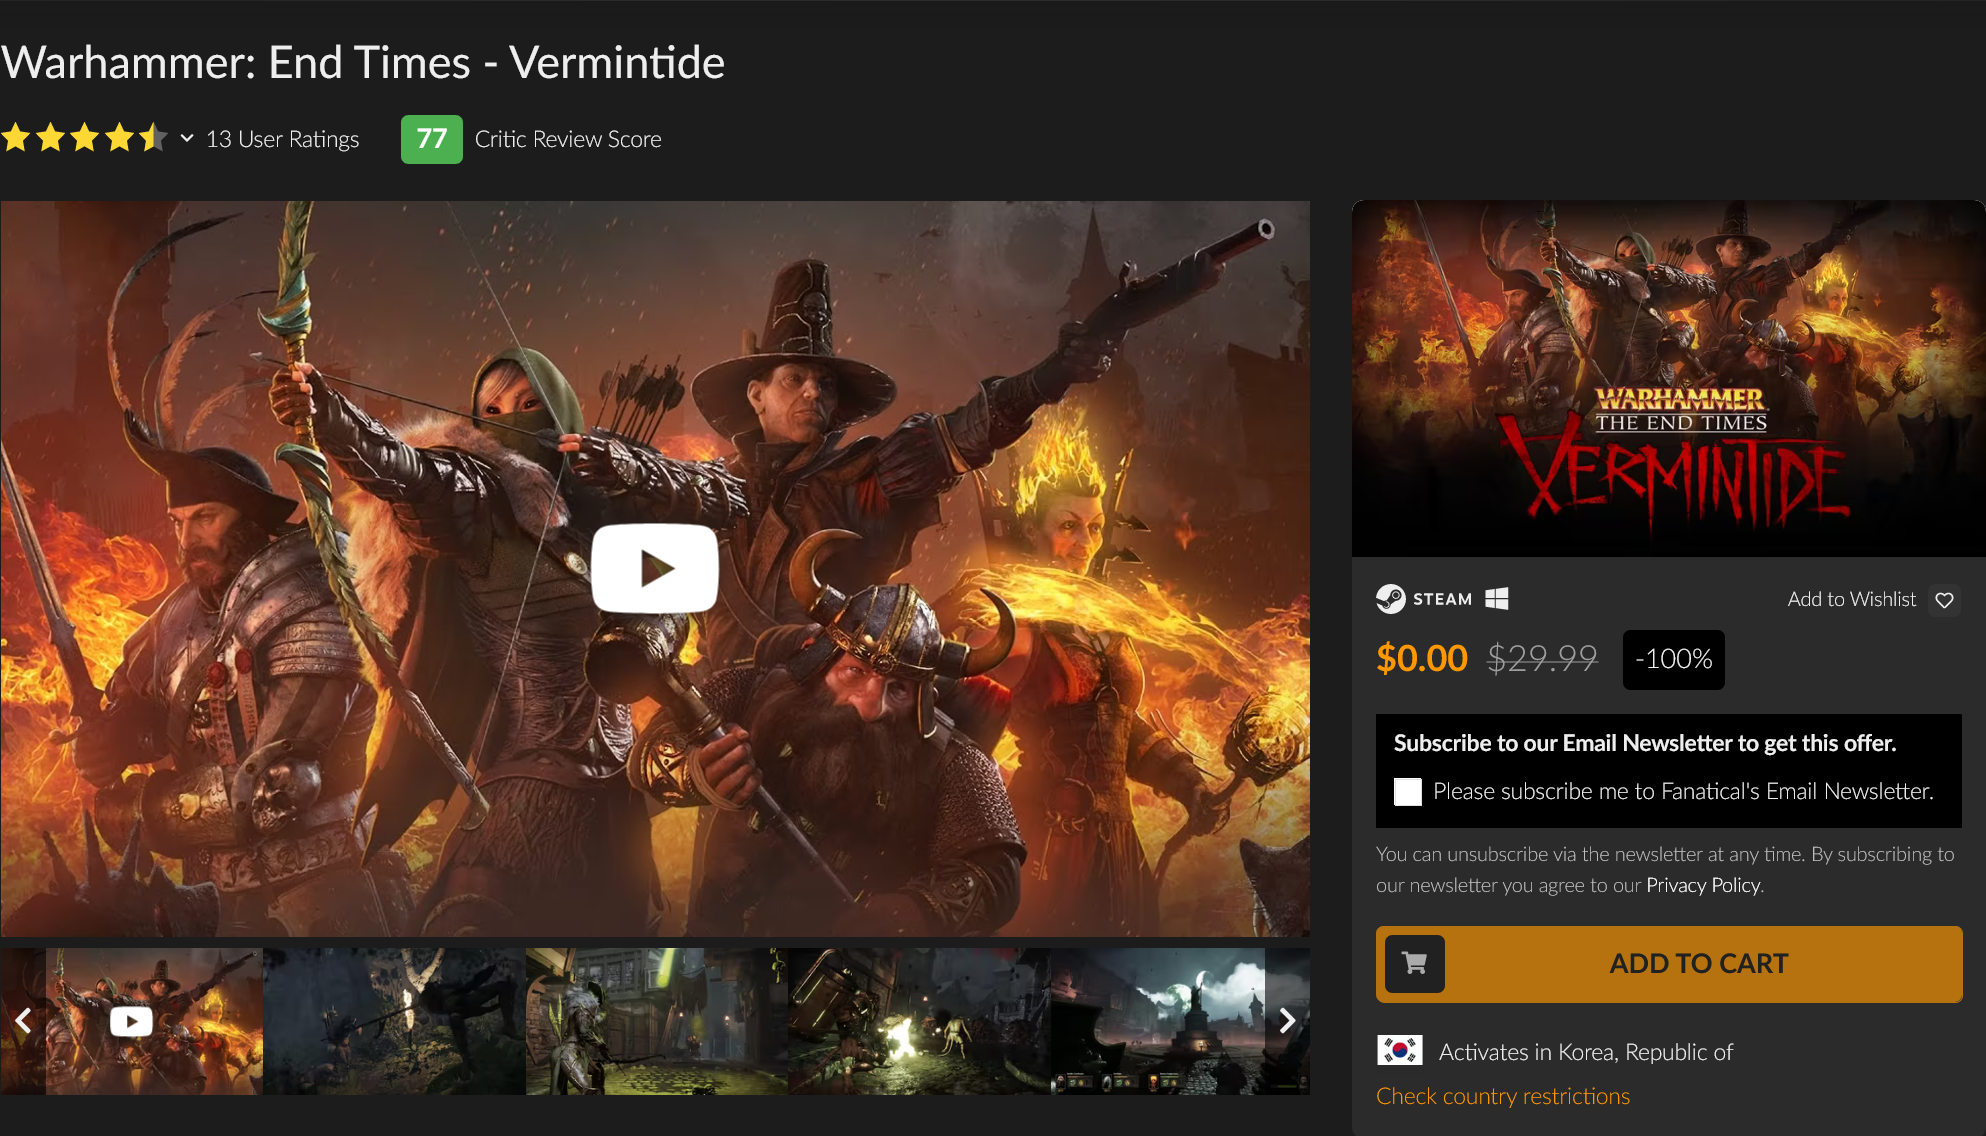 Screenshot 2021-11-25 at 01-32-07 Warhammer End Times - Vermintide PC Steam Game Fanatical.png